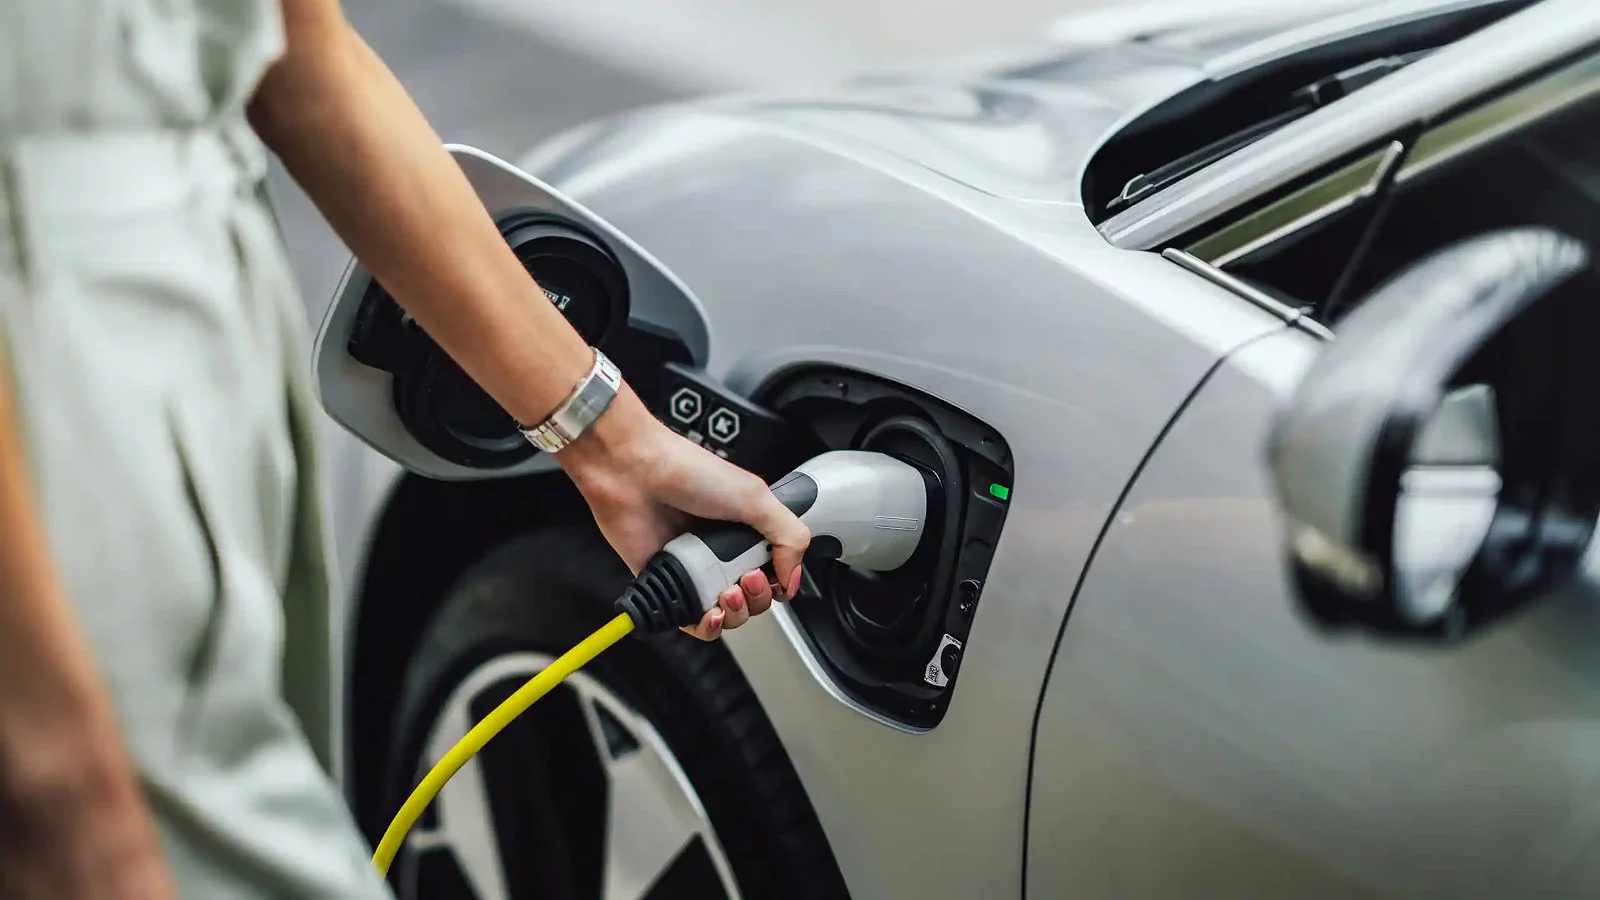 HOW TO CHARGE AN ELECTRIC CAR